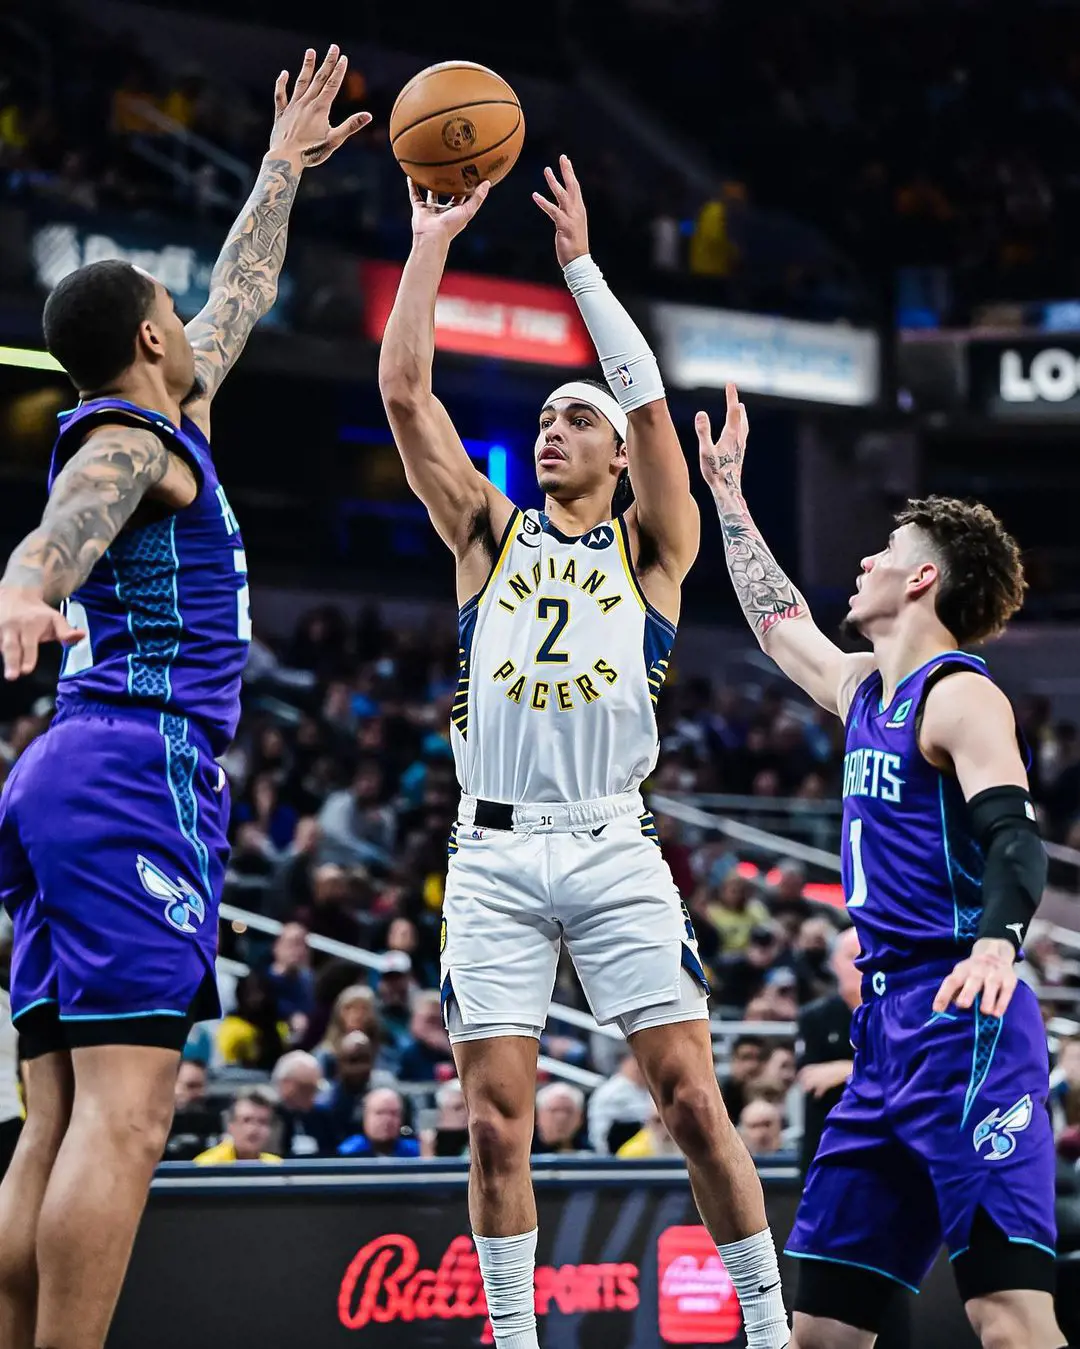 The Indiana Pacers point guard Andrew Nembhard netting a basket against the Hornets in the NBA game on 9 January 2023